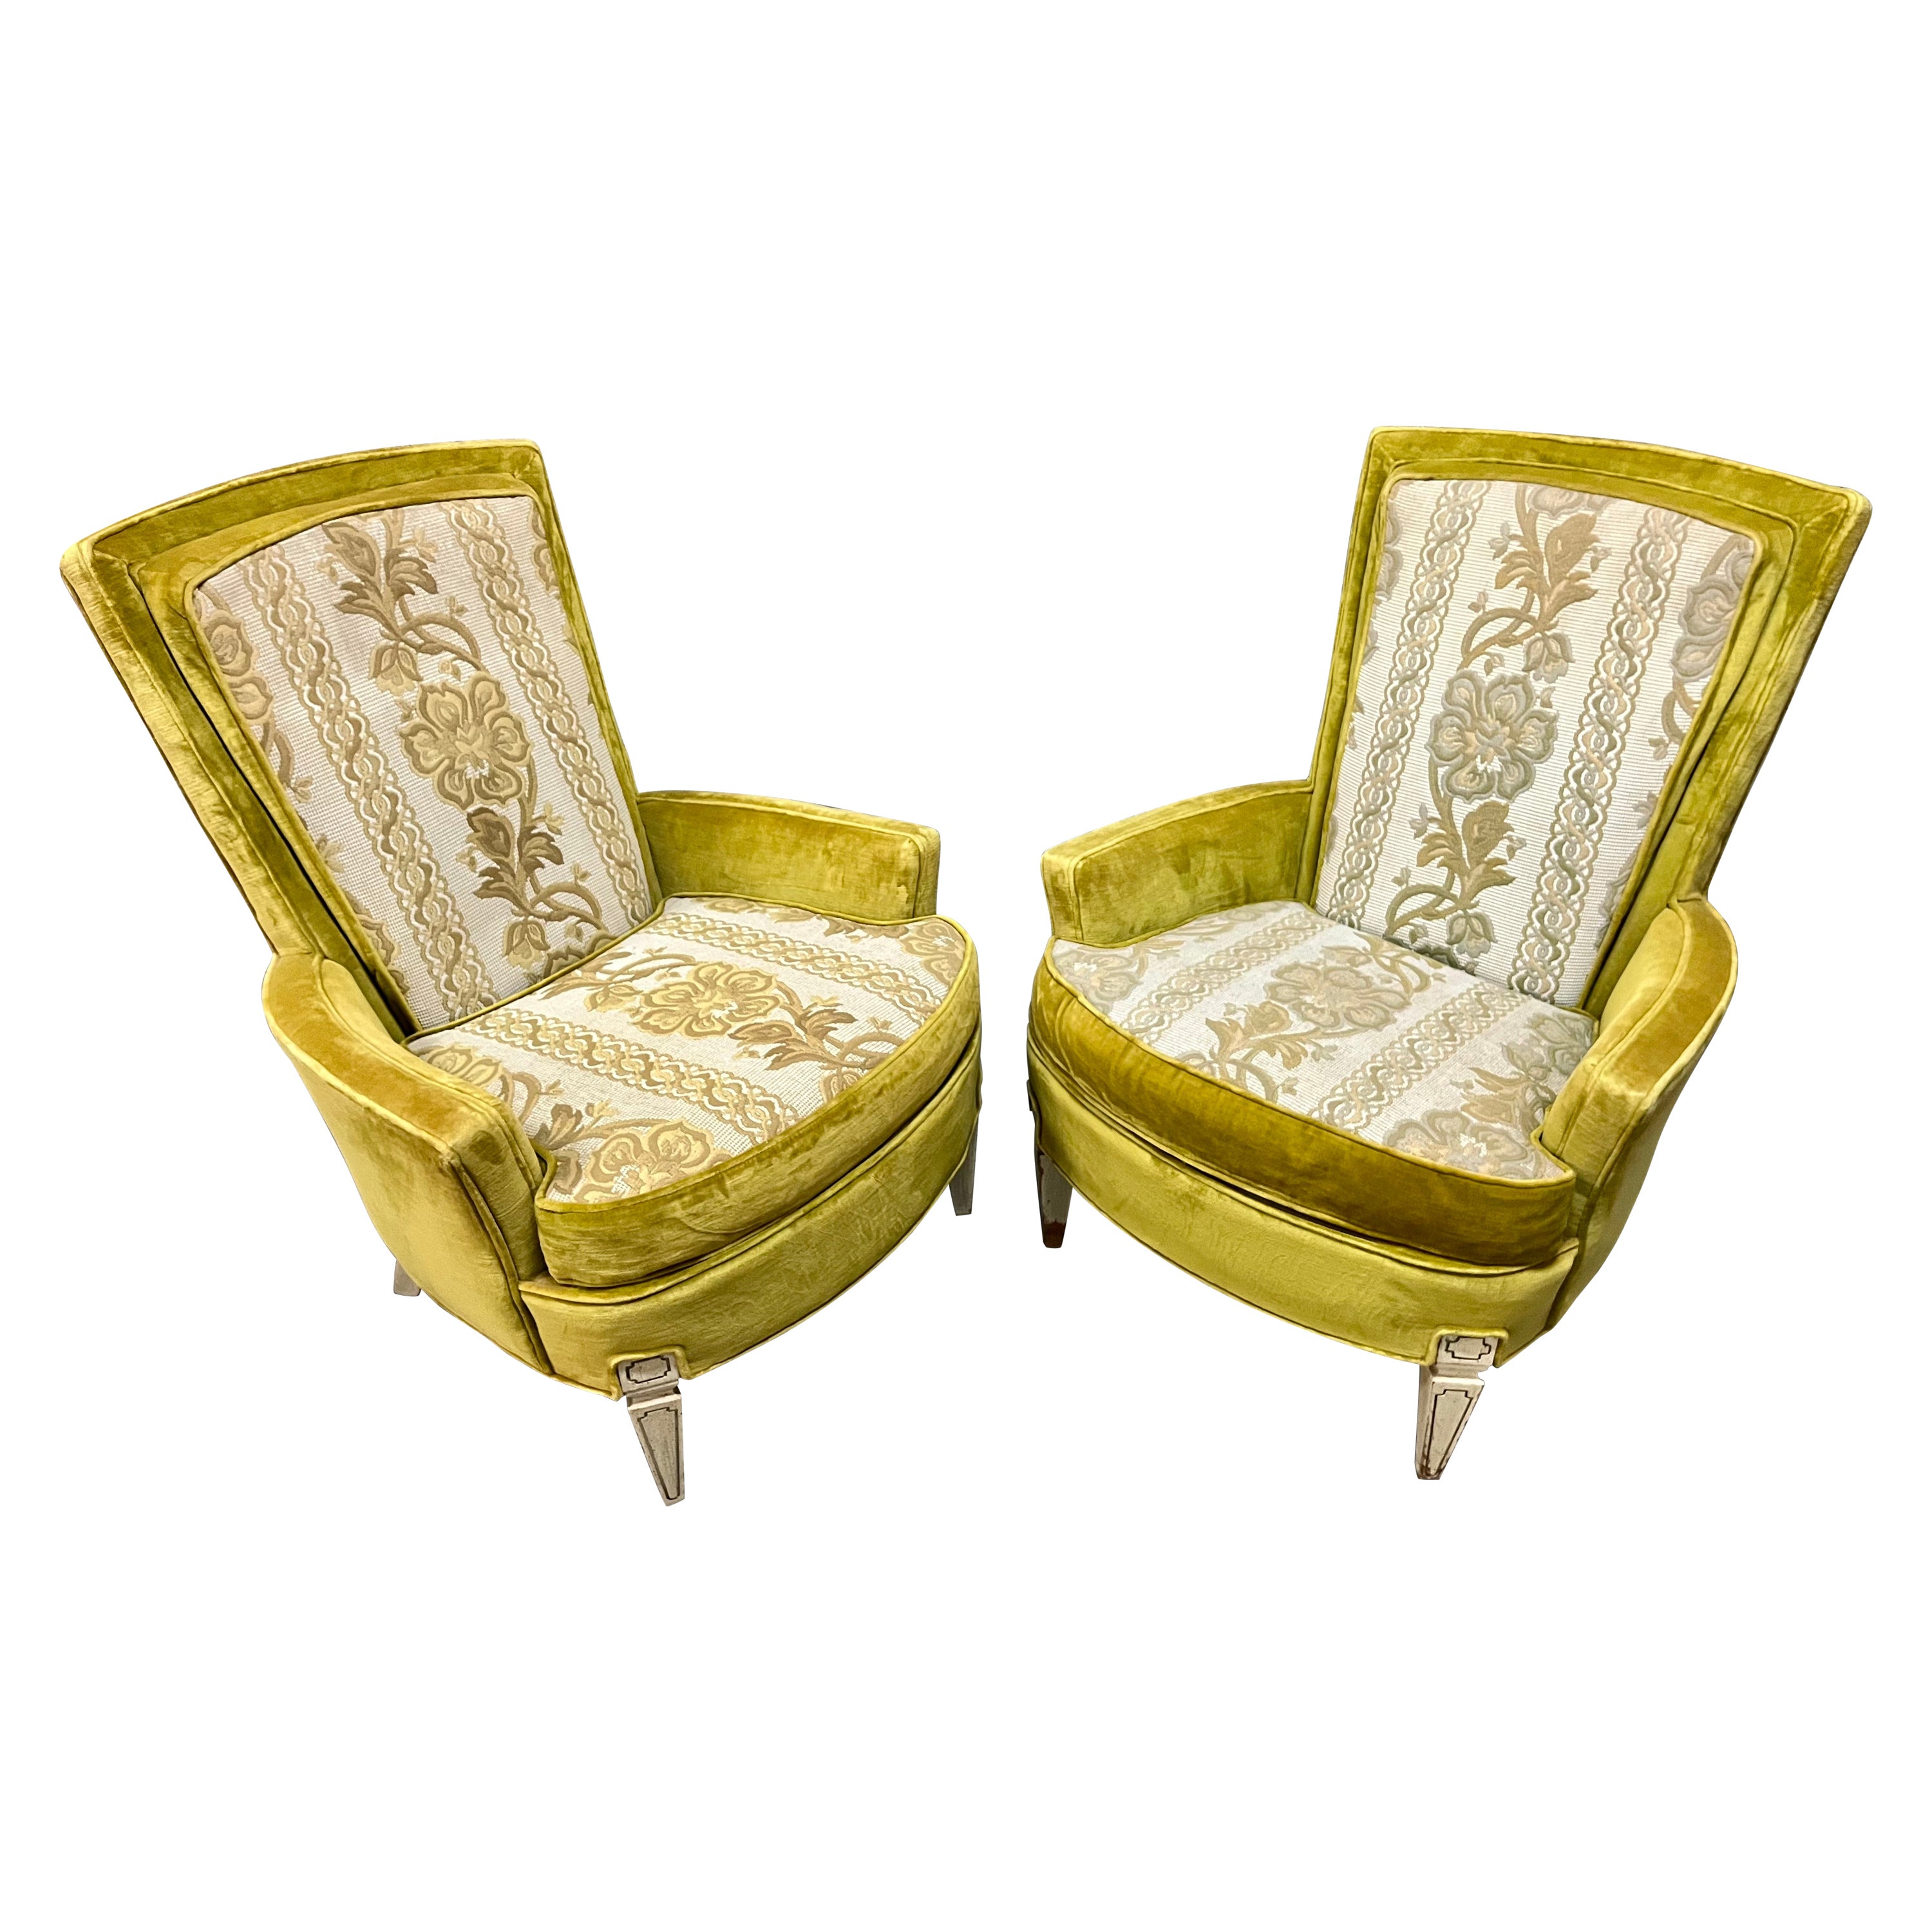 A Pair of Hollywood Regency Upholstered Lounge Chairs by Silver Craft. C. 1960s For Sale